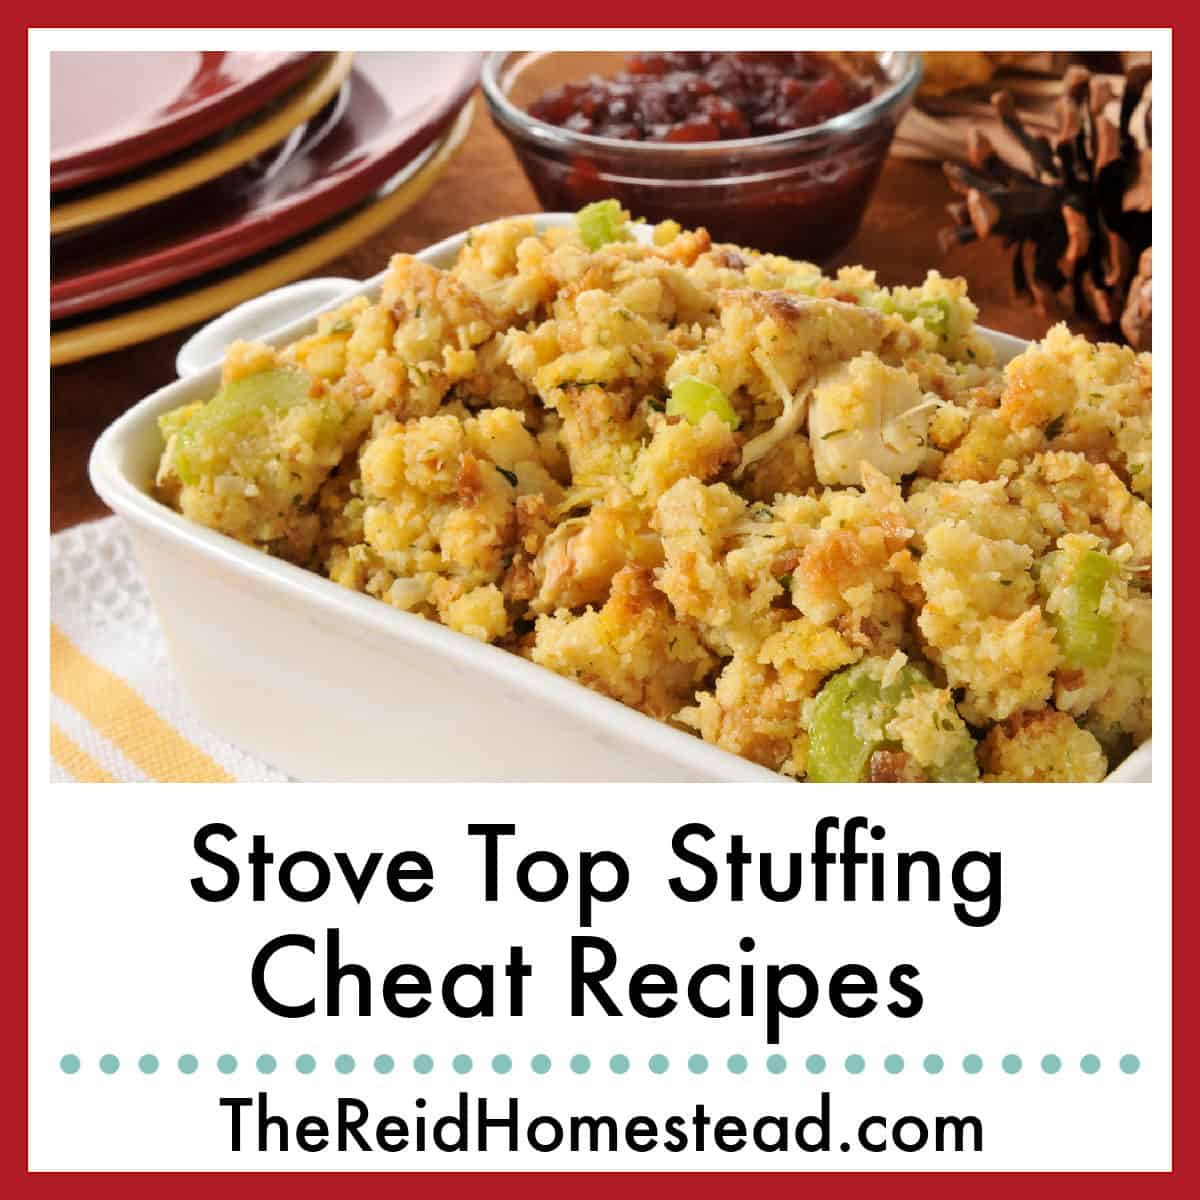 featured stove top stuffing cheat recipes